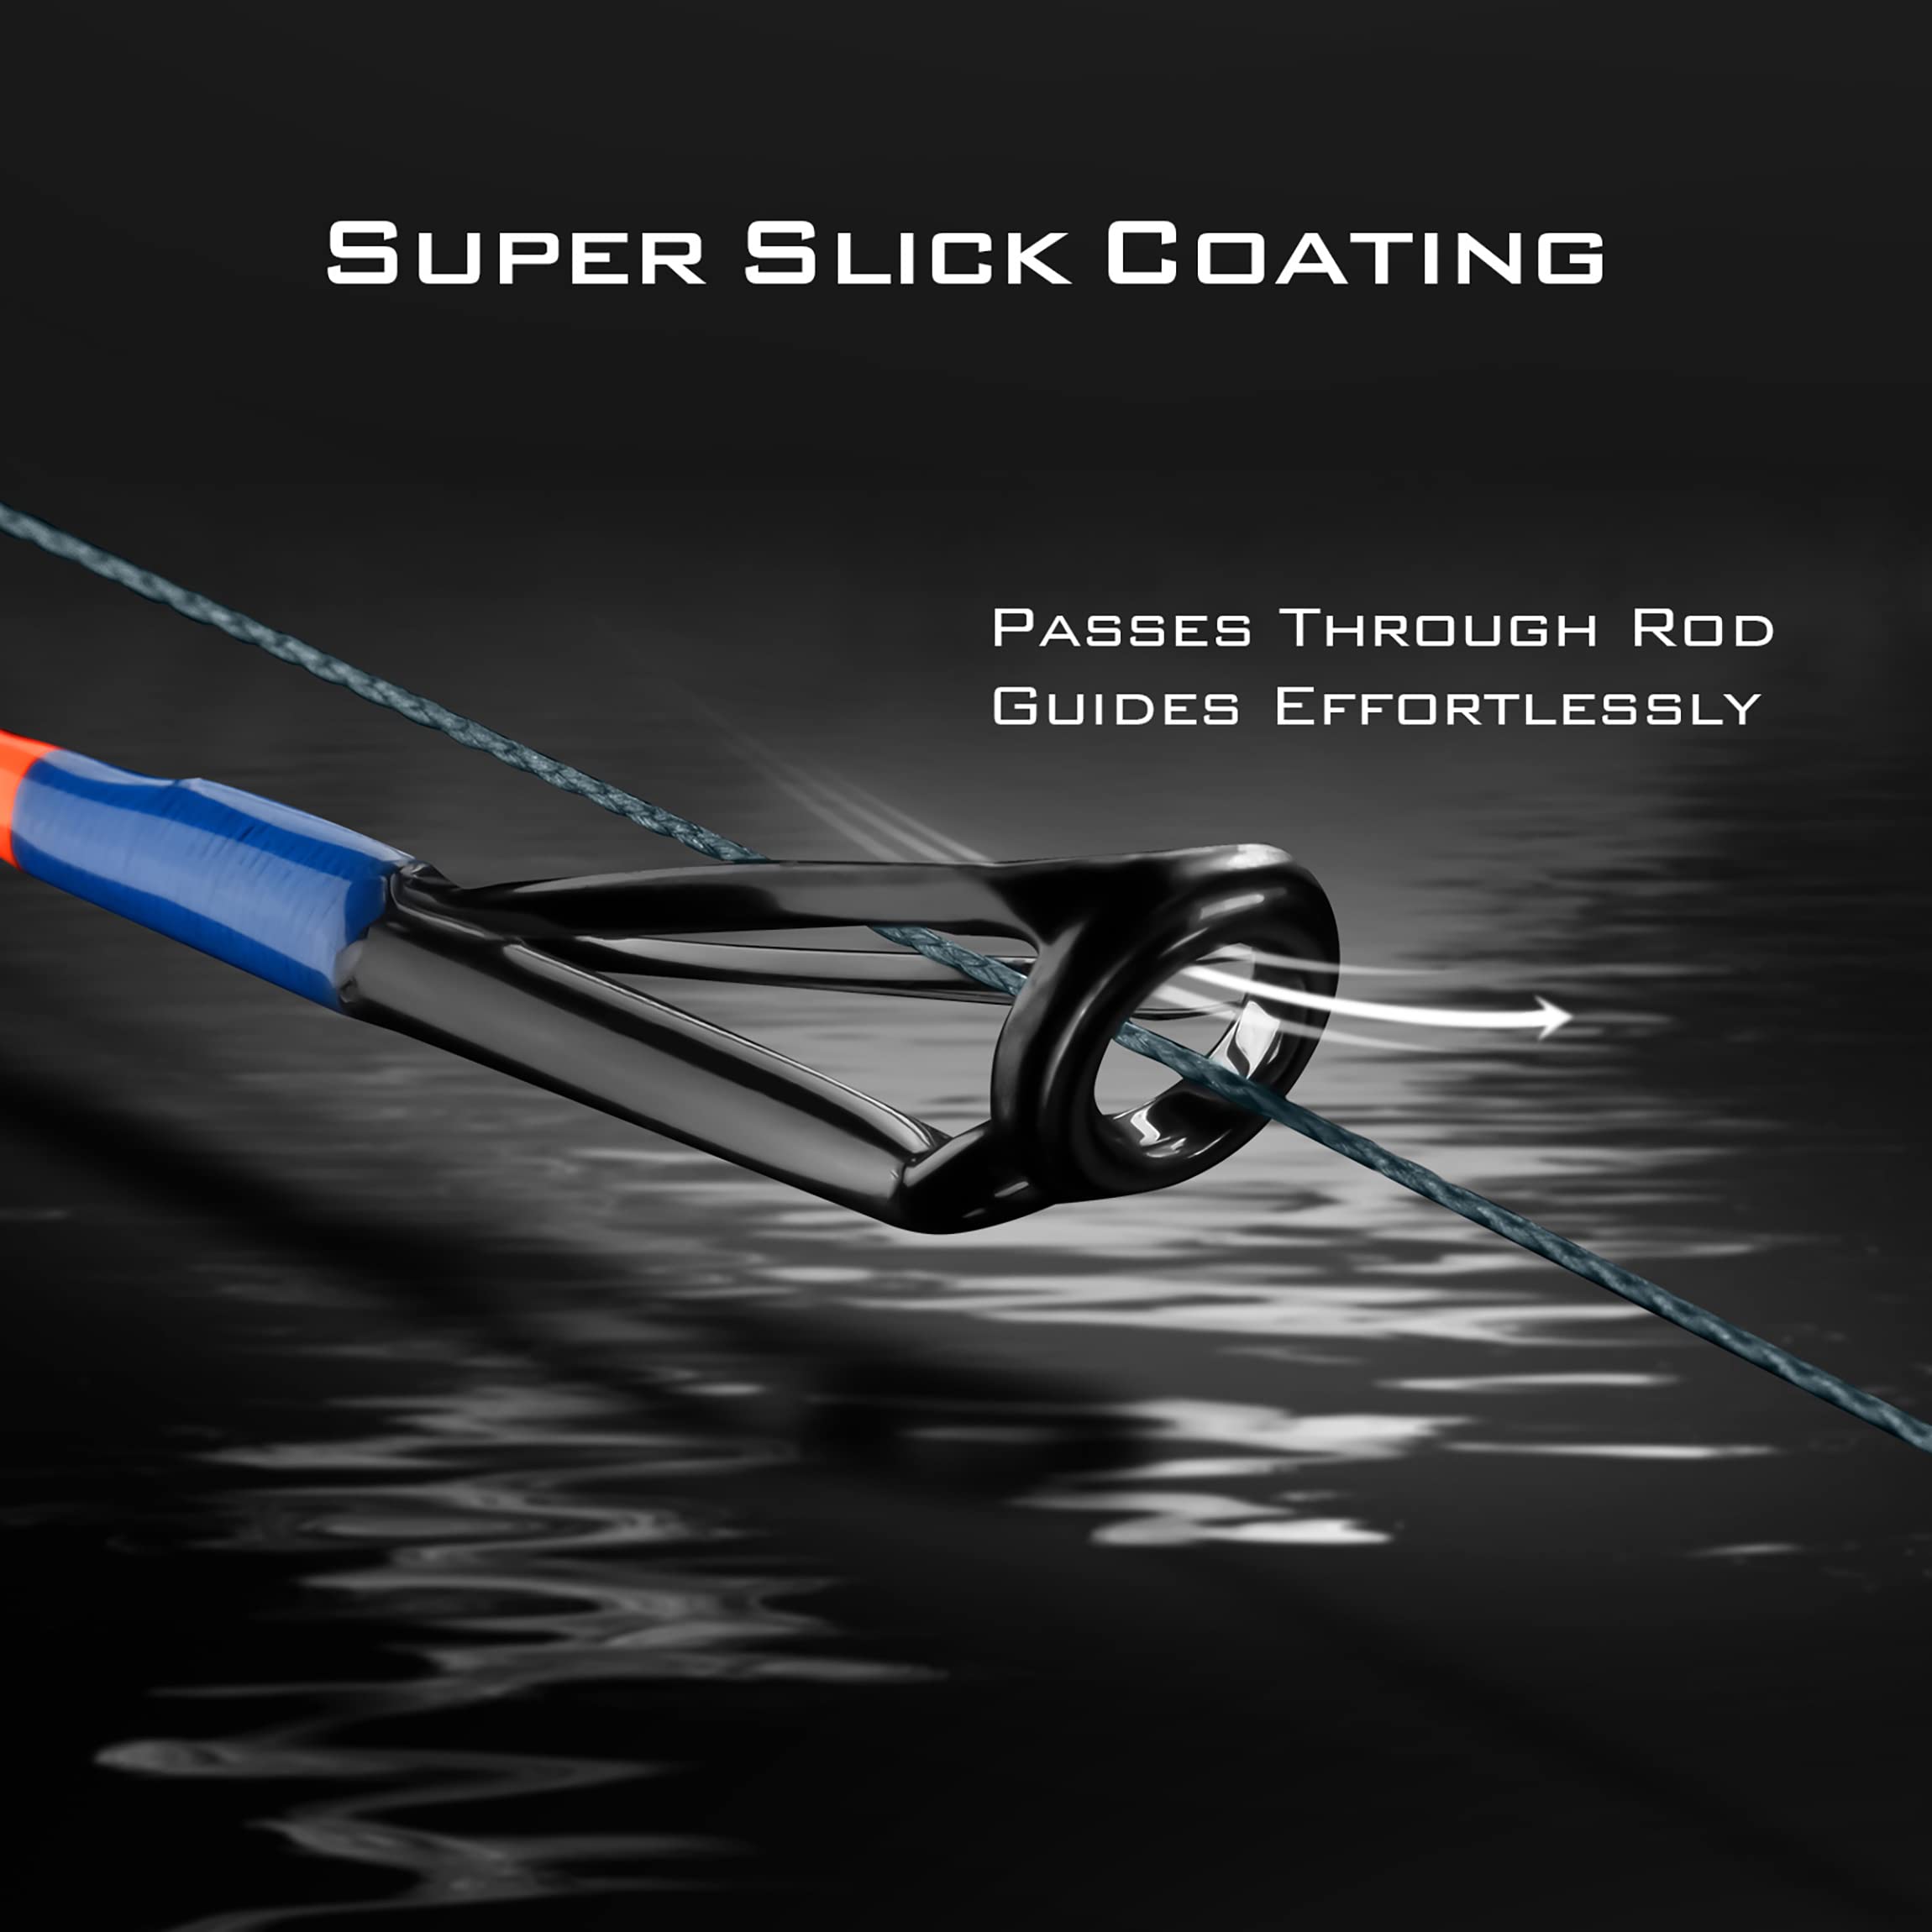 KastKing SuperPower Braided Fishing Line - Abrasion Resistant Braided Lines – Incredible Superline – Zero Stretch – Smaller Diameter – A Must-Have!